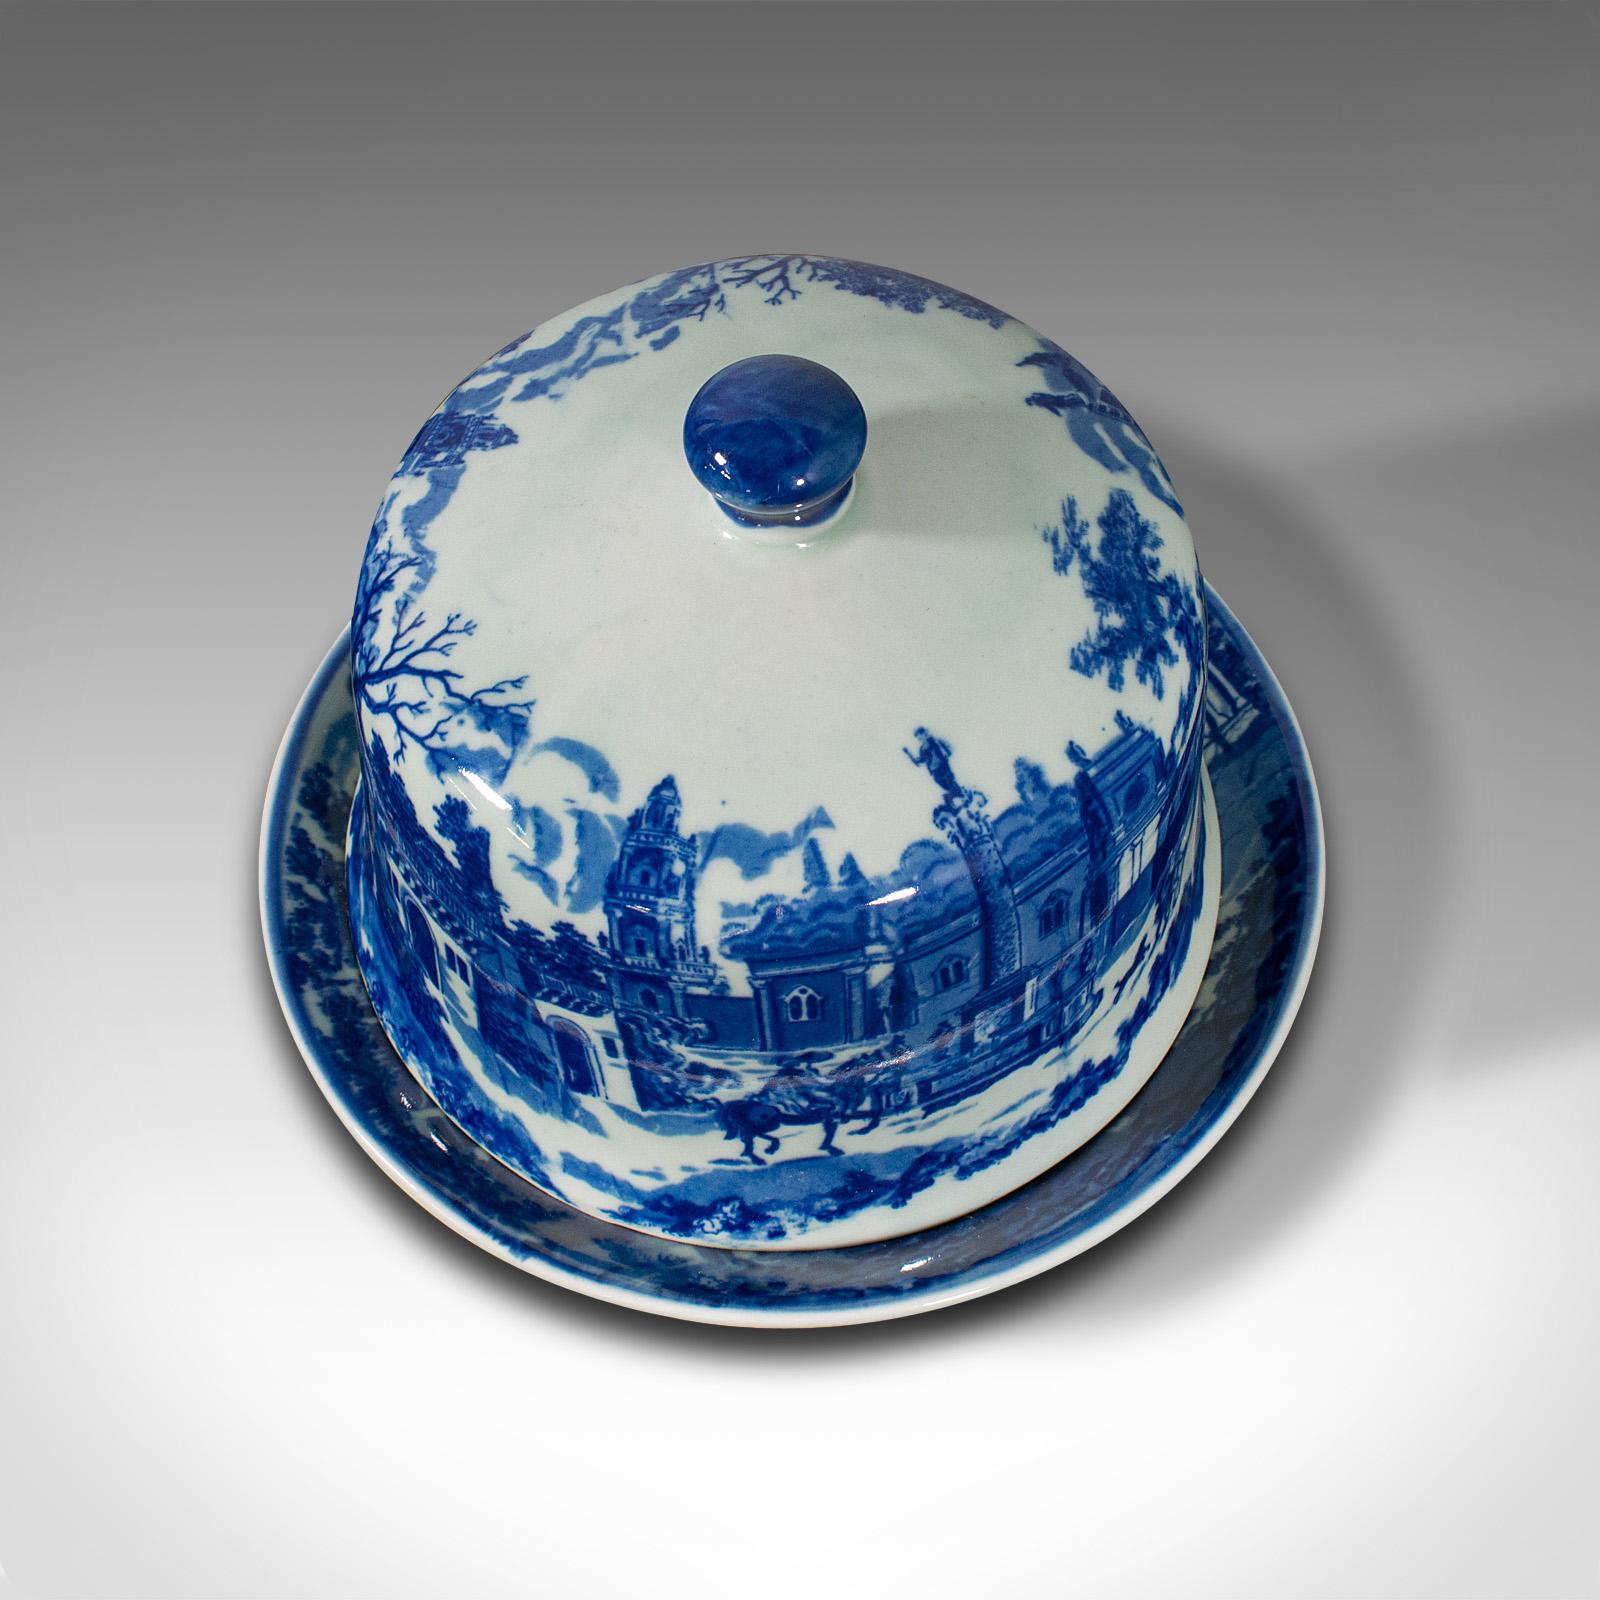 British Antique Cheese Keeper, English, Ceramic, Butter Dome, Victorian, Circa 1900 For Sale